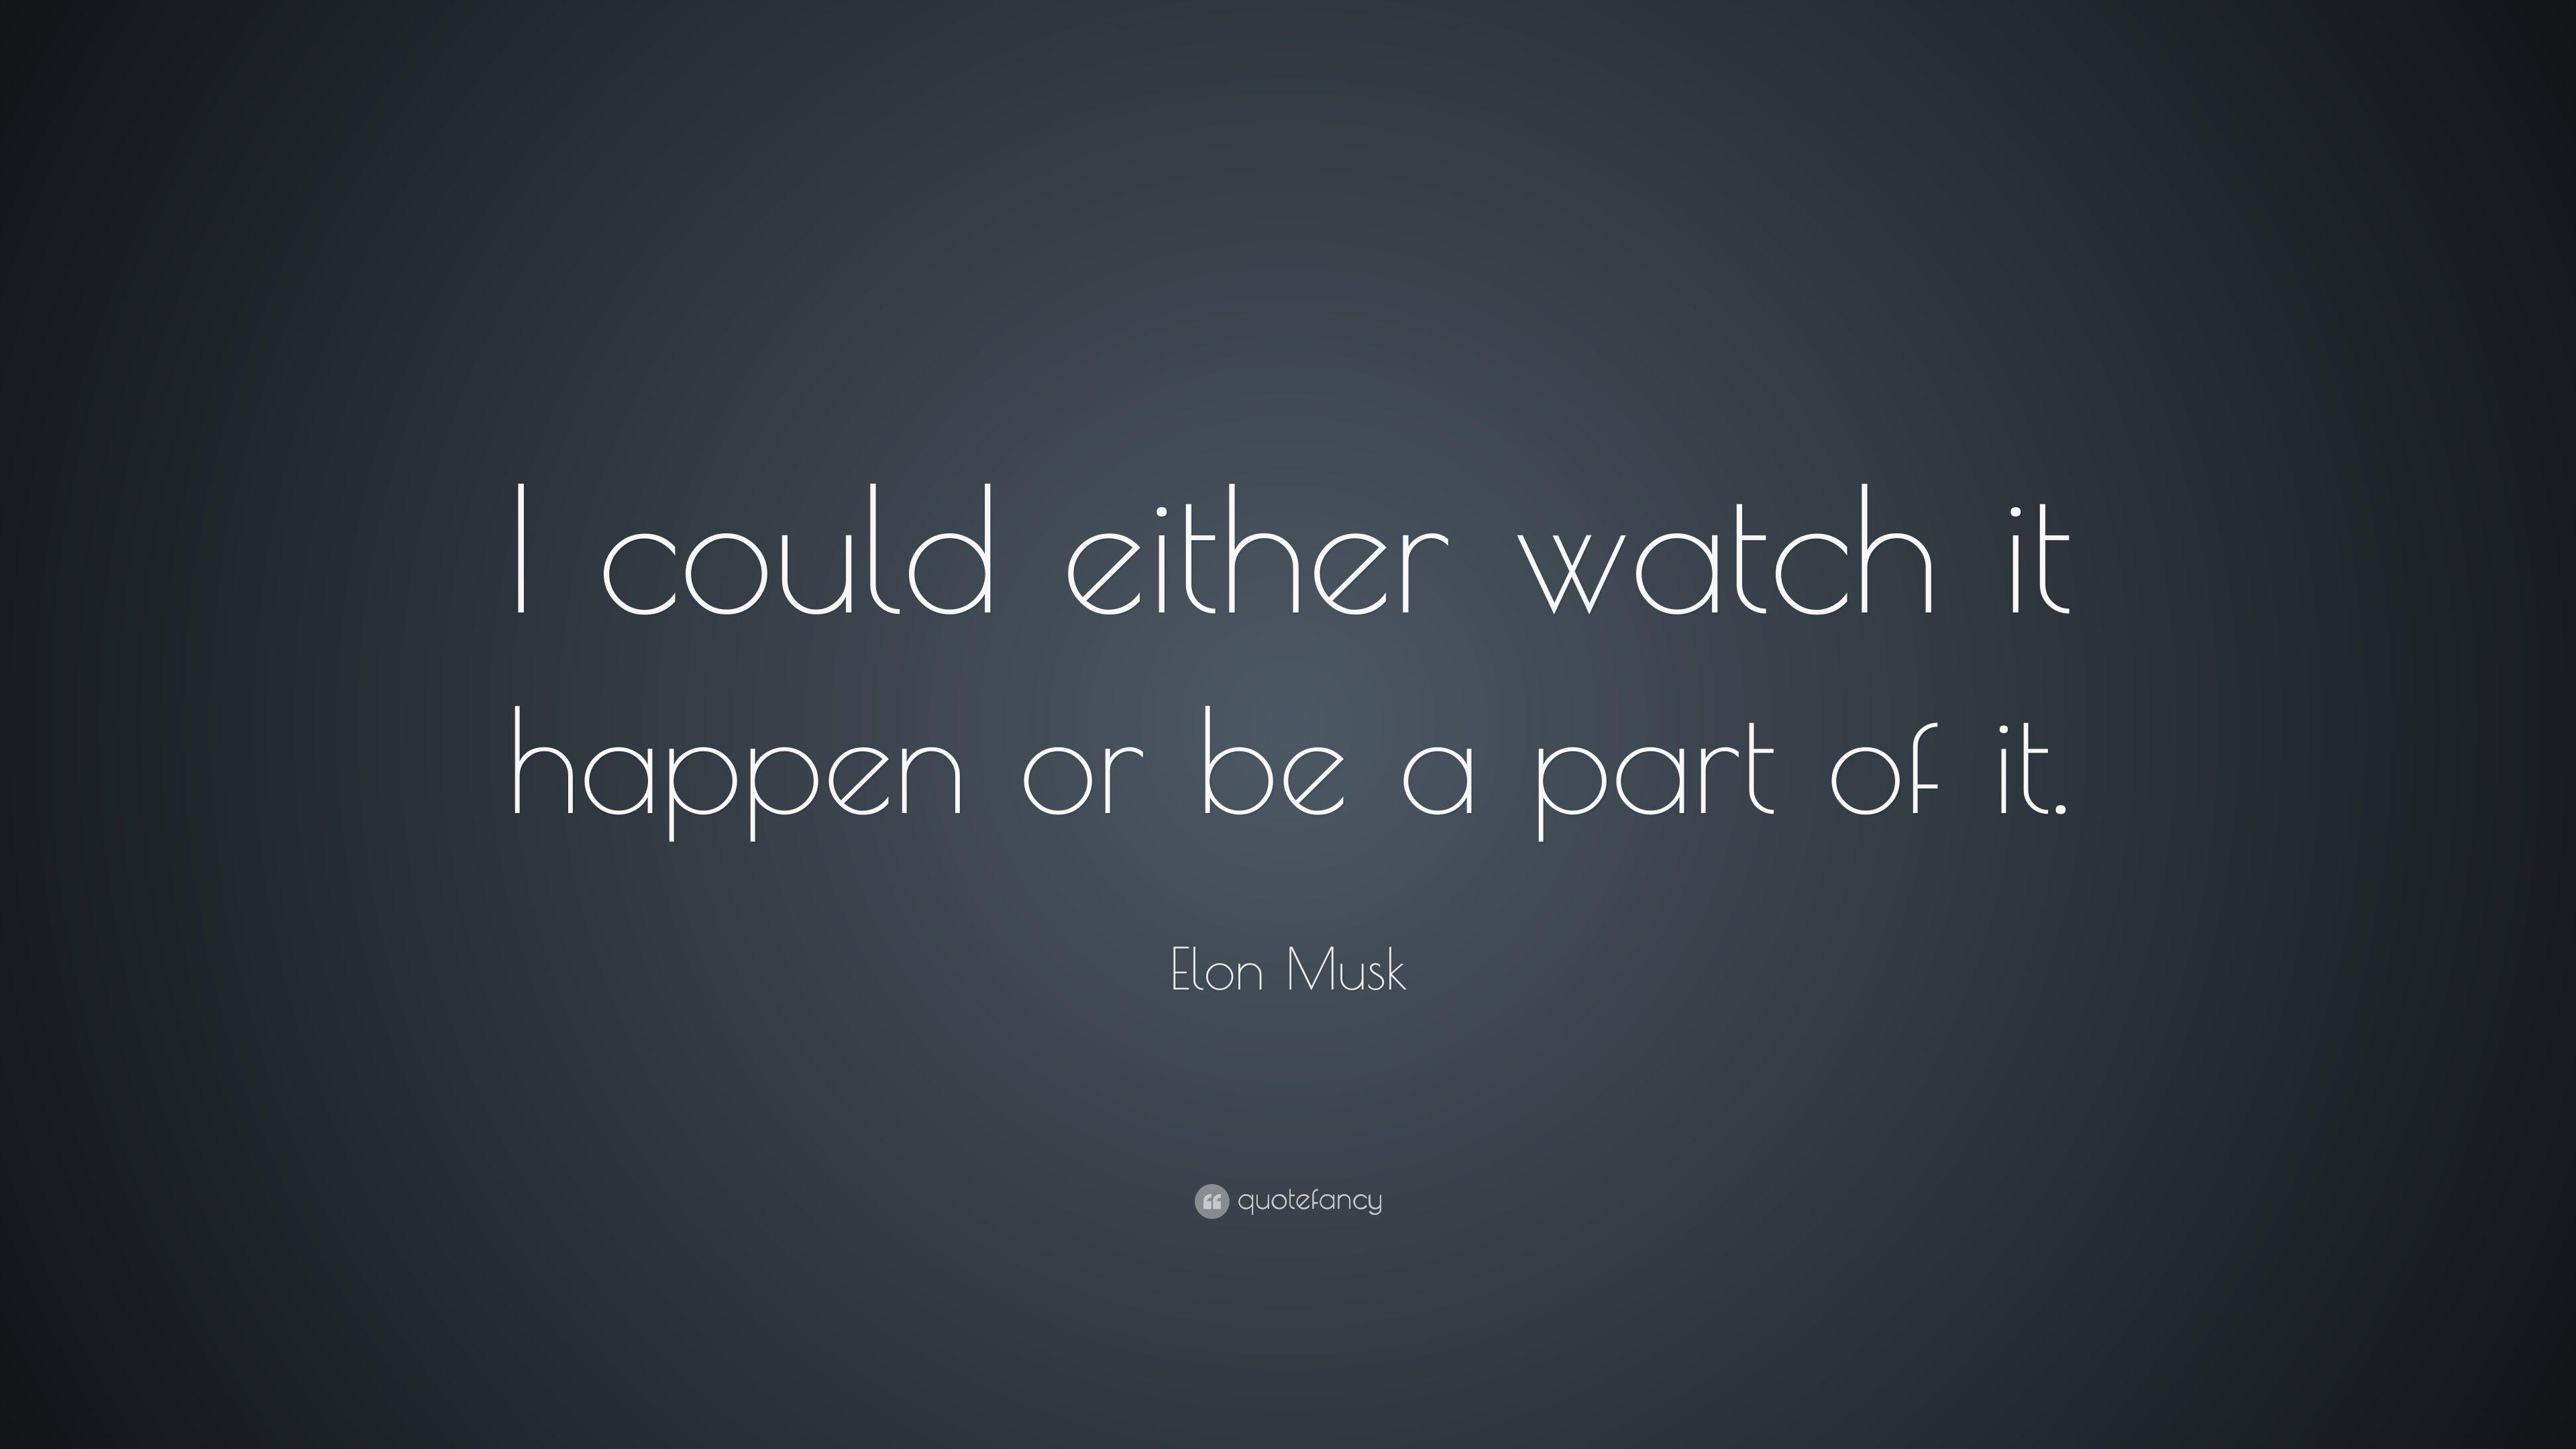 Elon Musk Quote: “I could either watch it happen or be a part